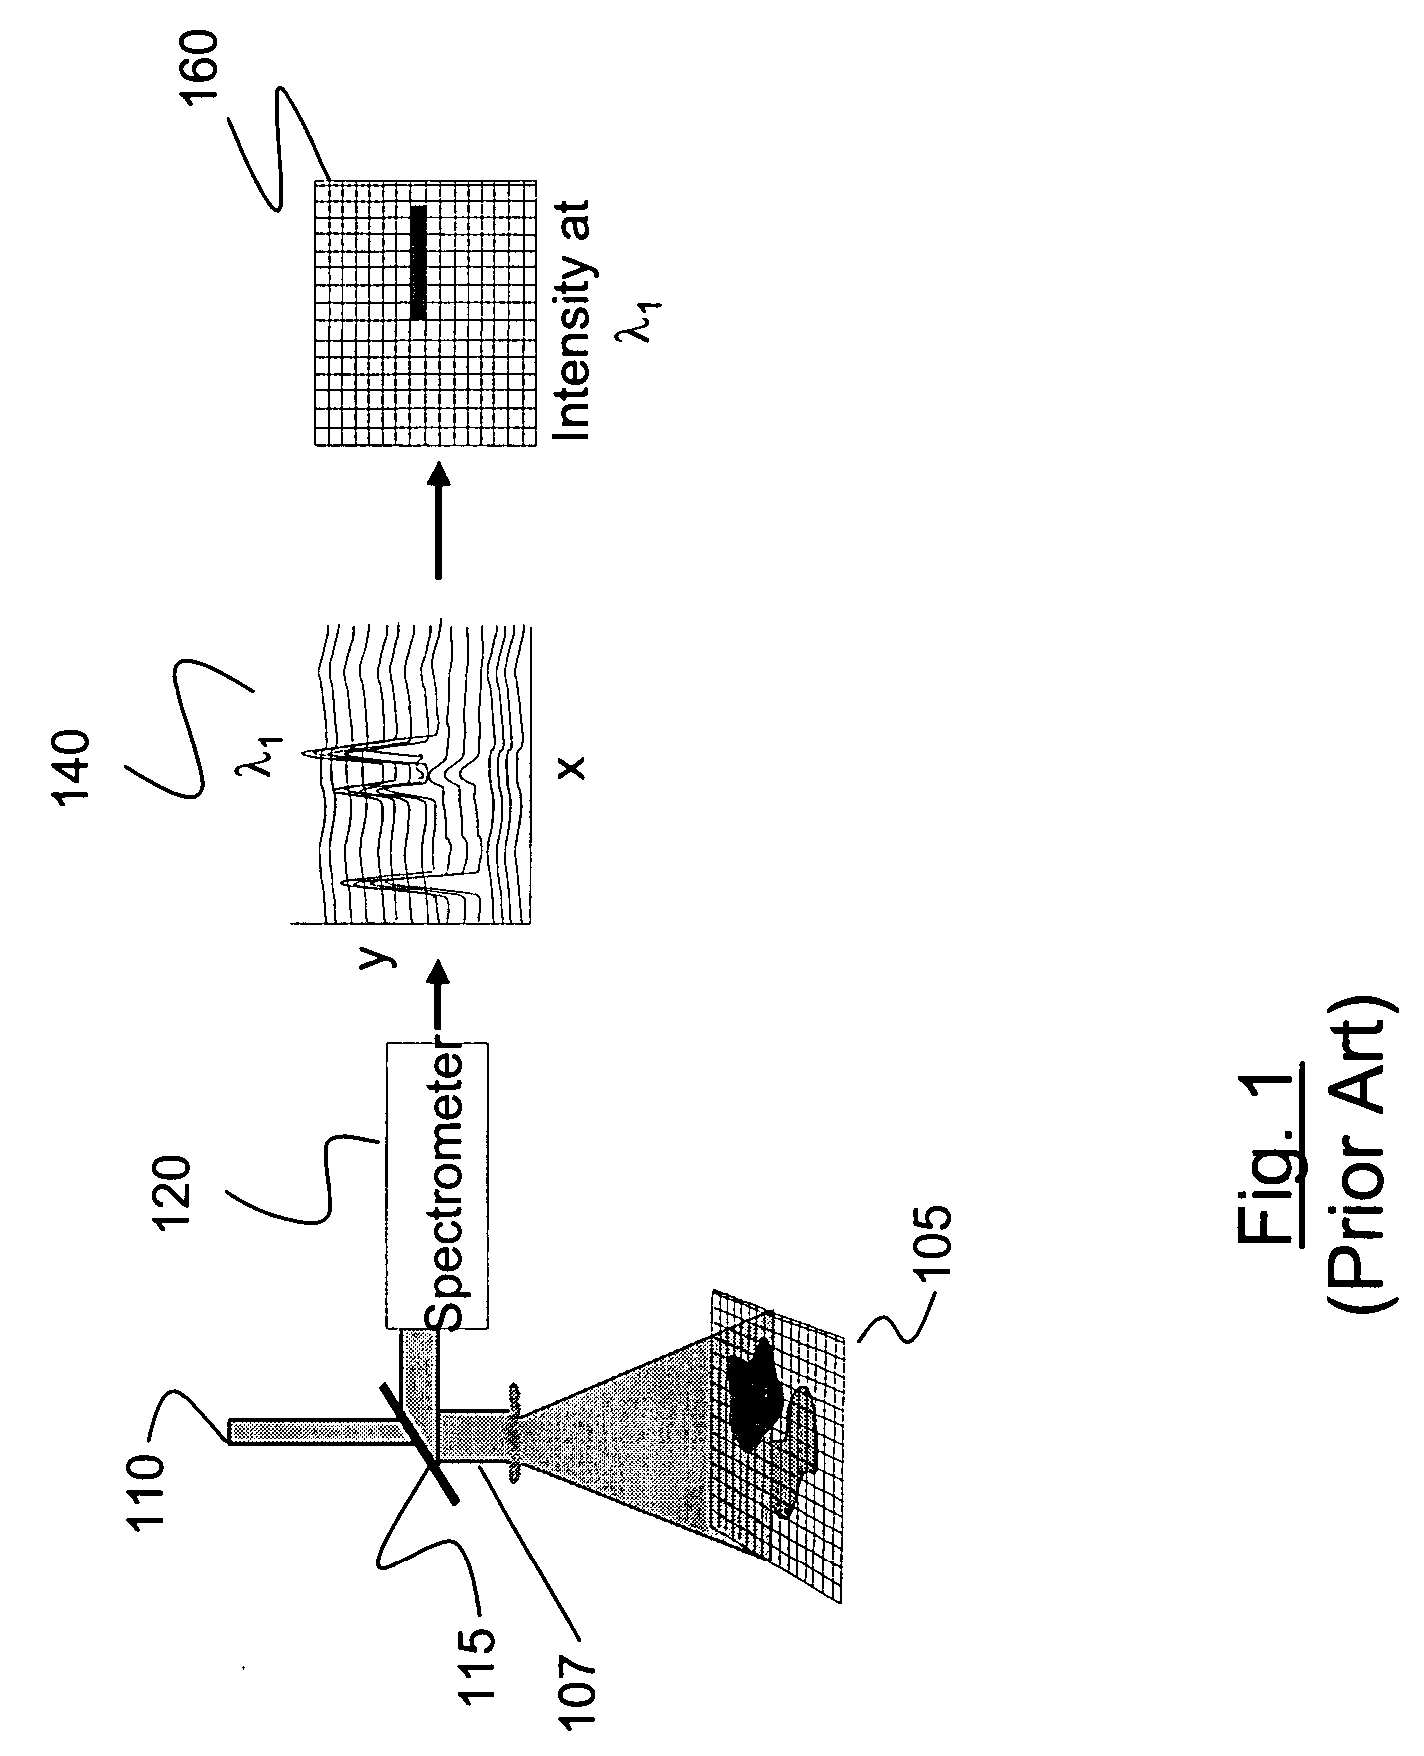 Method and apparatus for compact Fabry-Perot imaging spectrometer